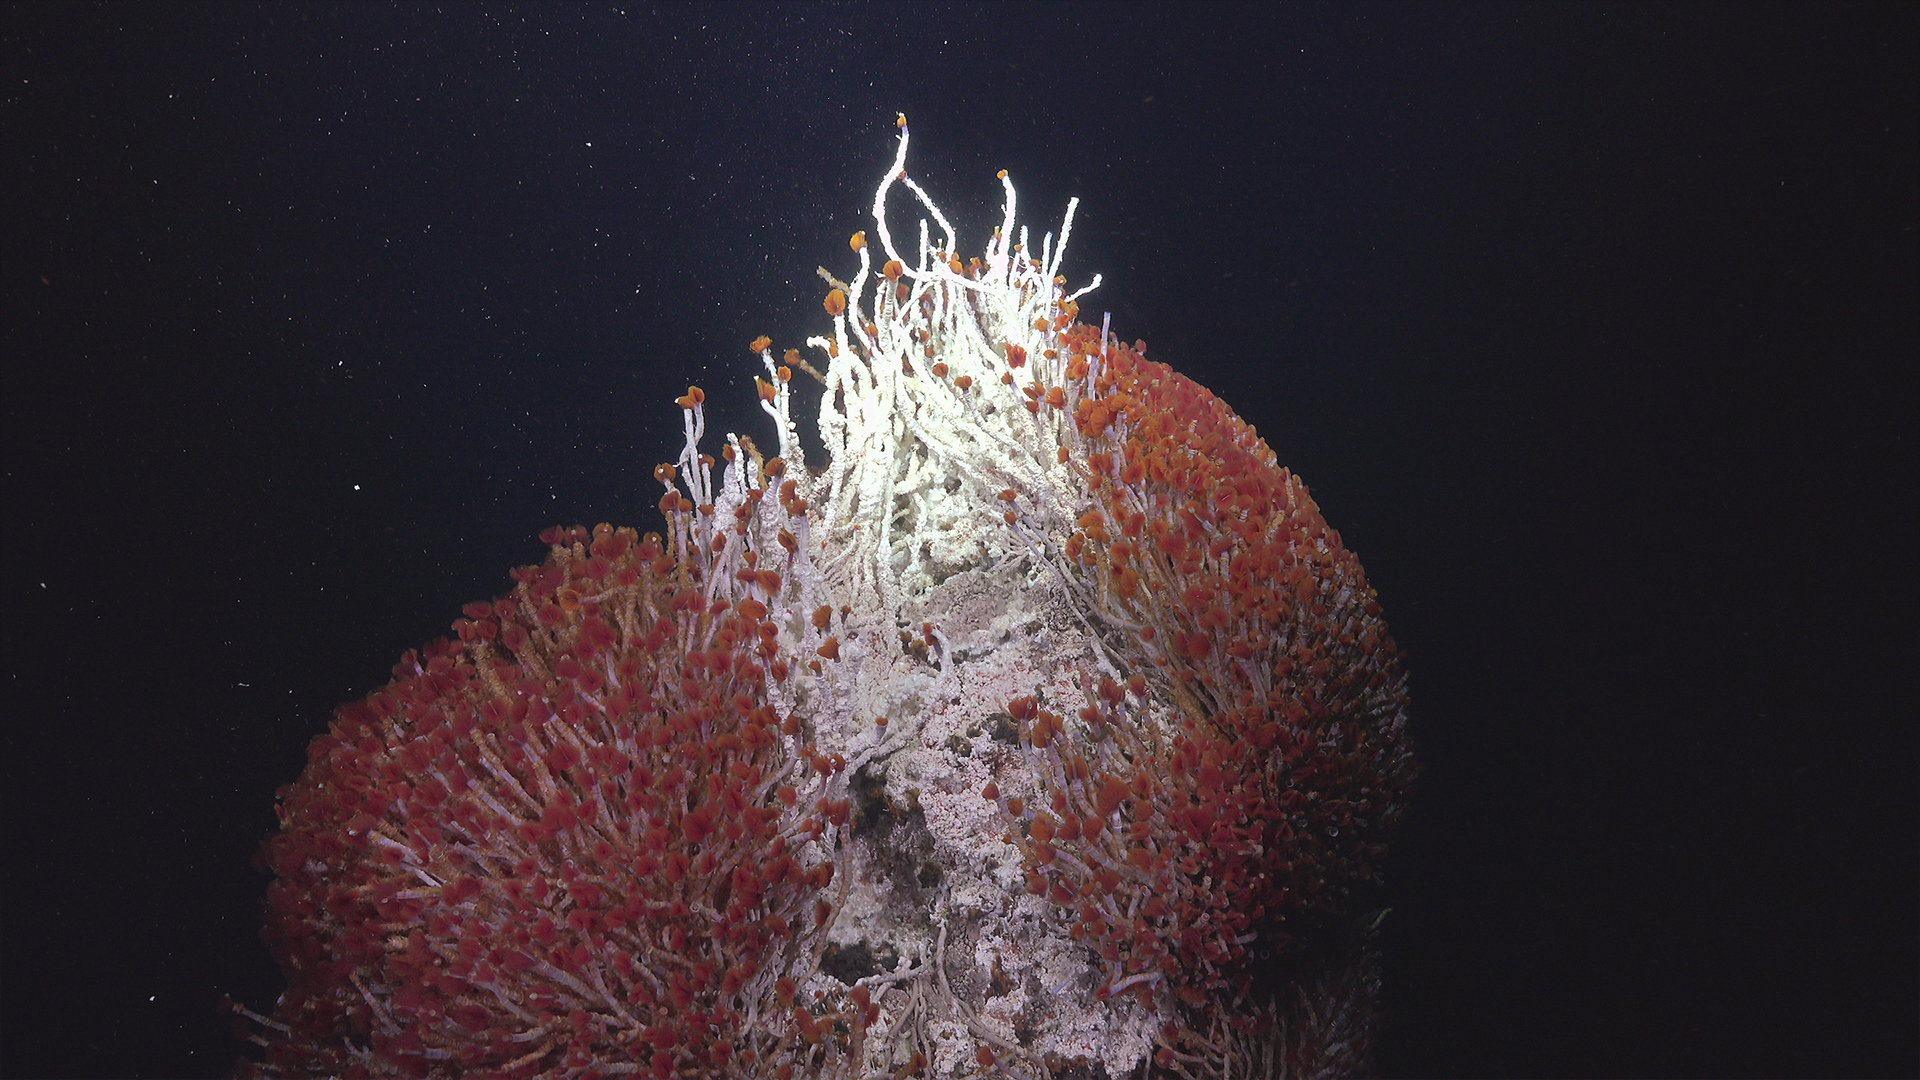 Tube worms form part of a recently ecosystem beneath a dep sea hydrothermal vent.